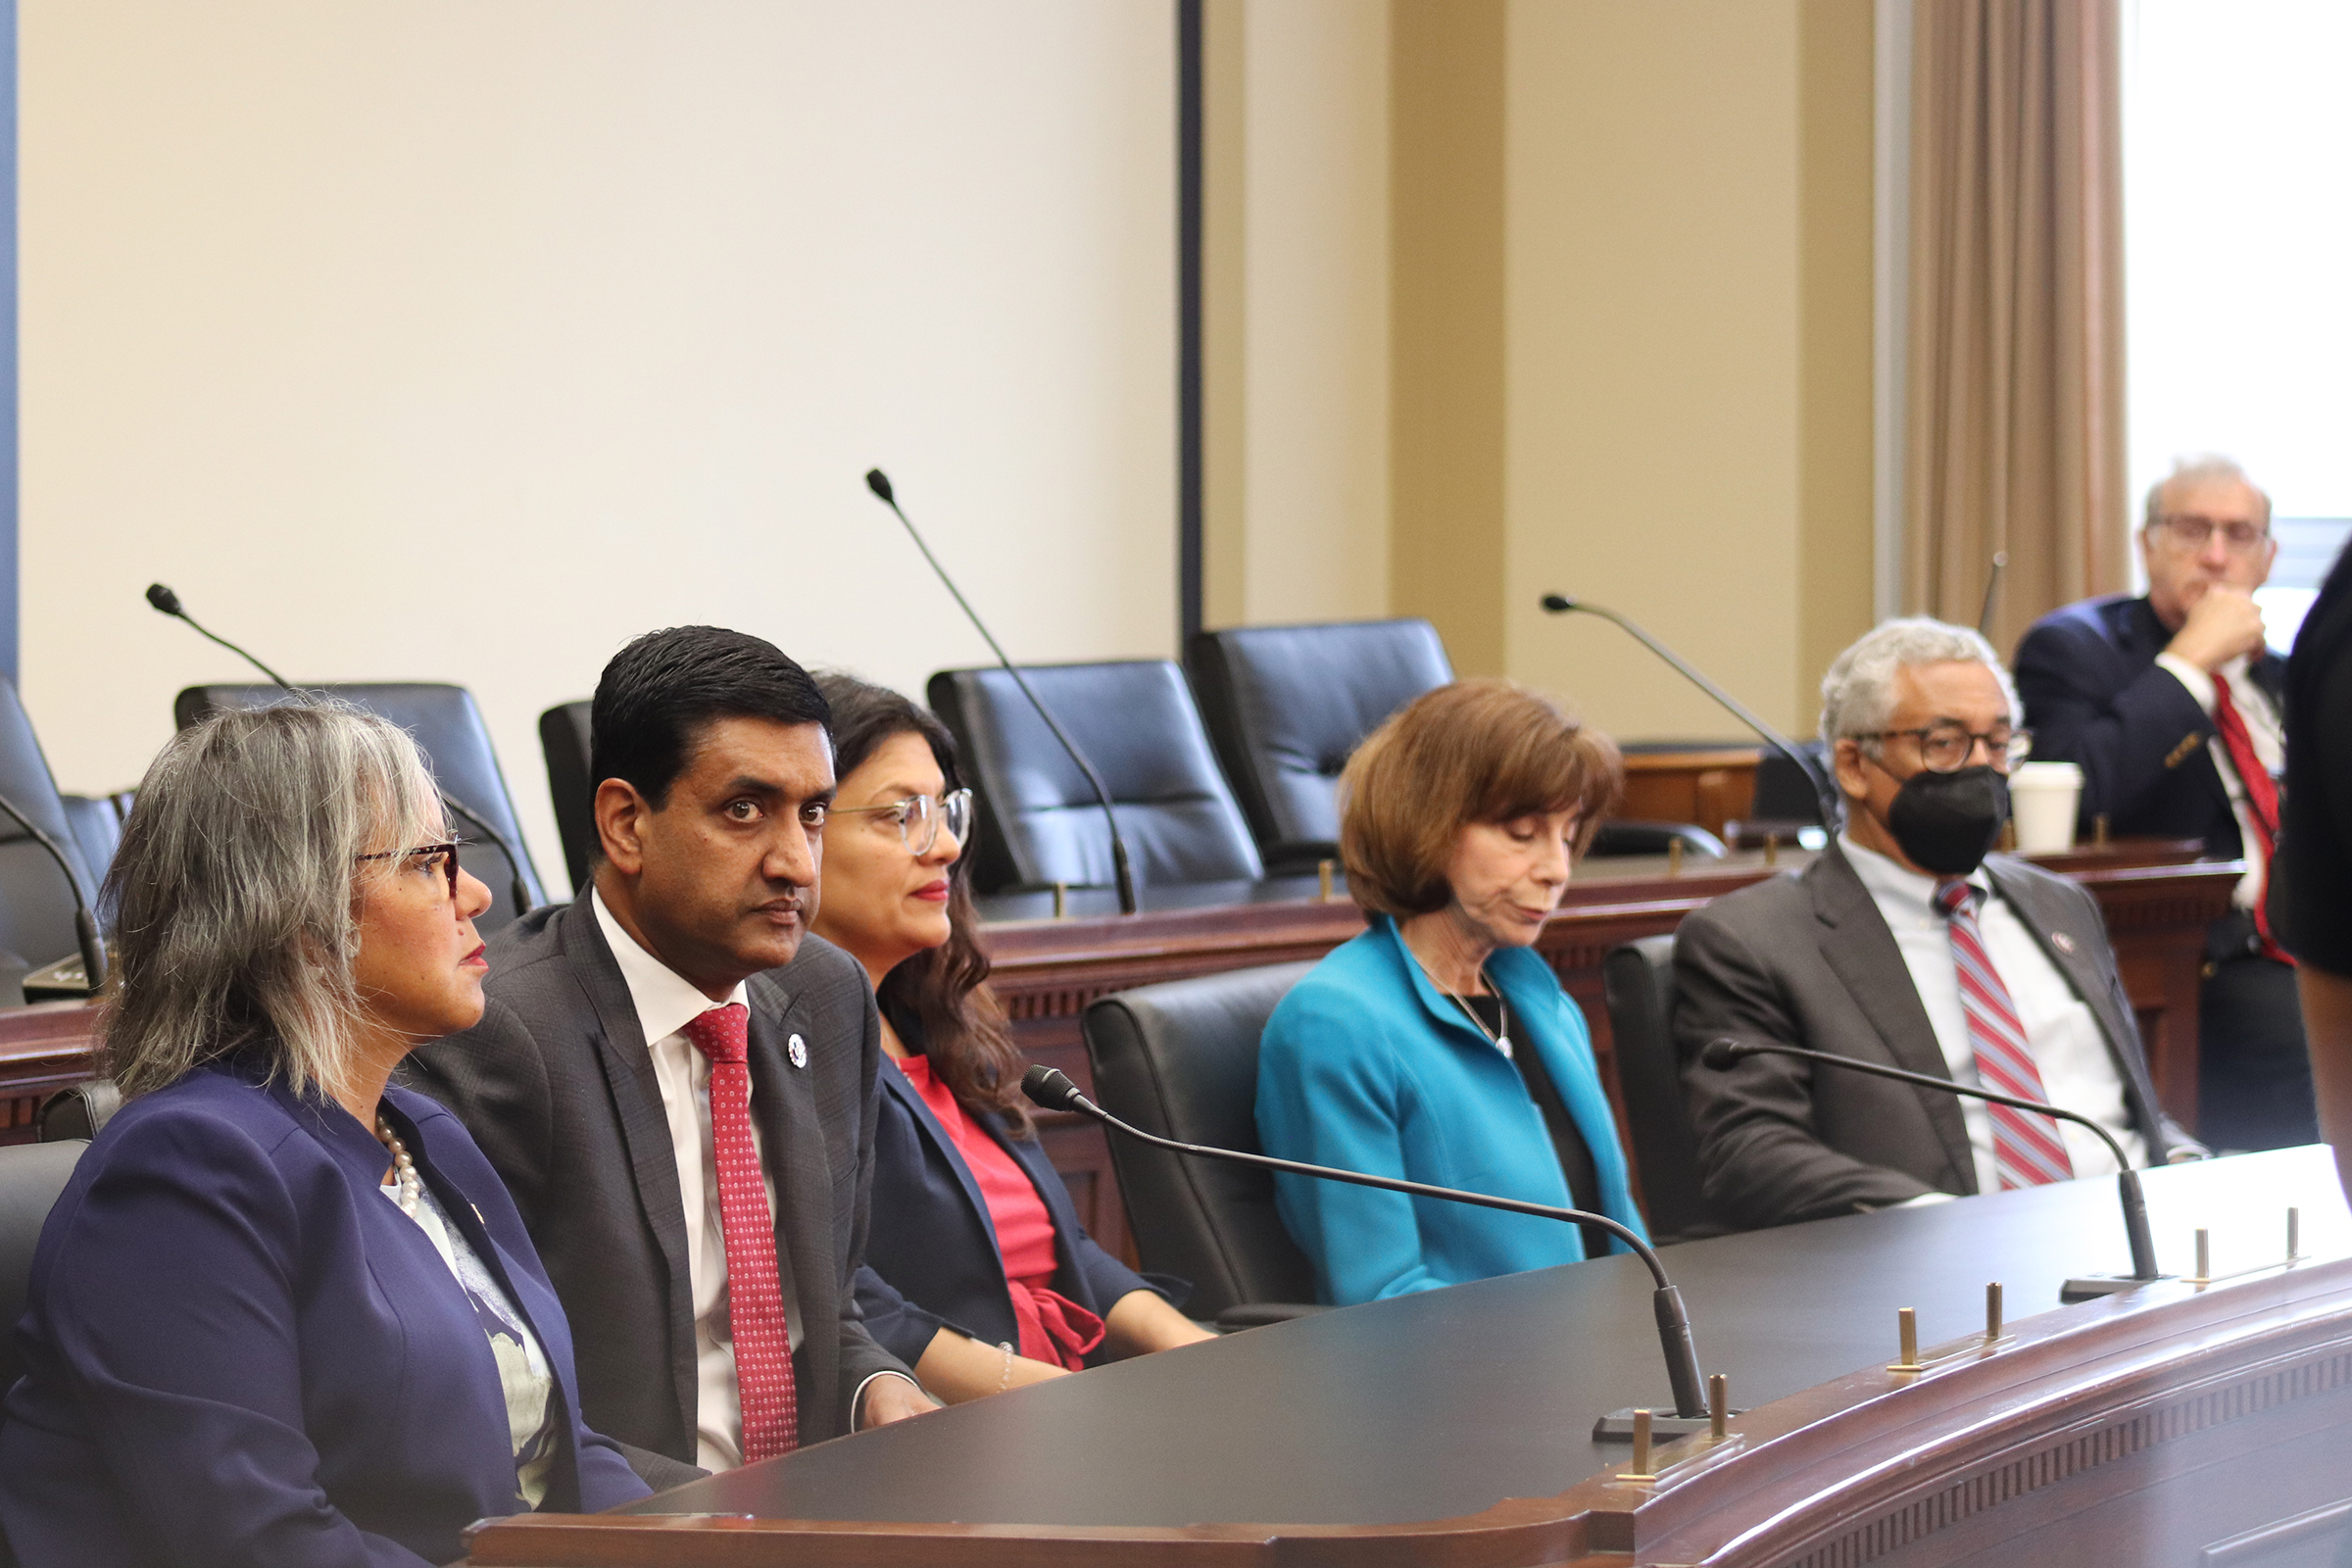 Democratic Reps. Rep. Robin Kelly, D-Ill; from left, Rep. Ro Khanna, D- Calif.; Rep. Rashida Tlaib, D- Mich.; Rep. Kathy Manning, D-N.C.; and Rep. Bobby Scott, D-Va attend the Poor People’s Campaign’s congressional briefing on Sept. 22, 2022, at the Rayburn House Office Building in Washington. RNS photo by Adelle M. Banks